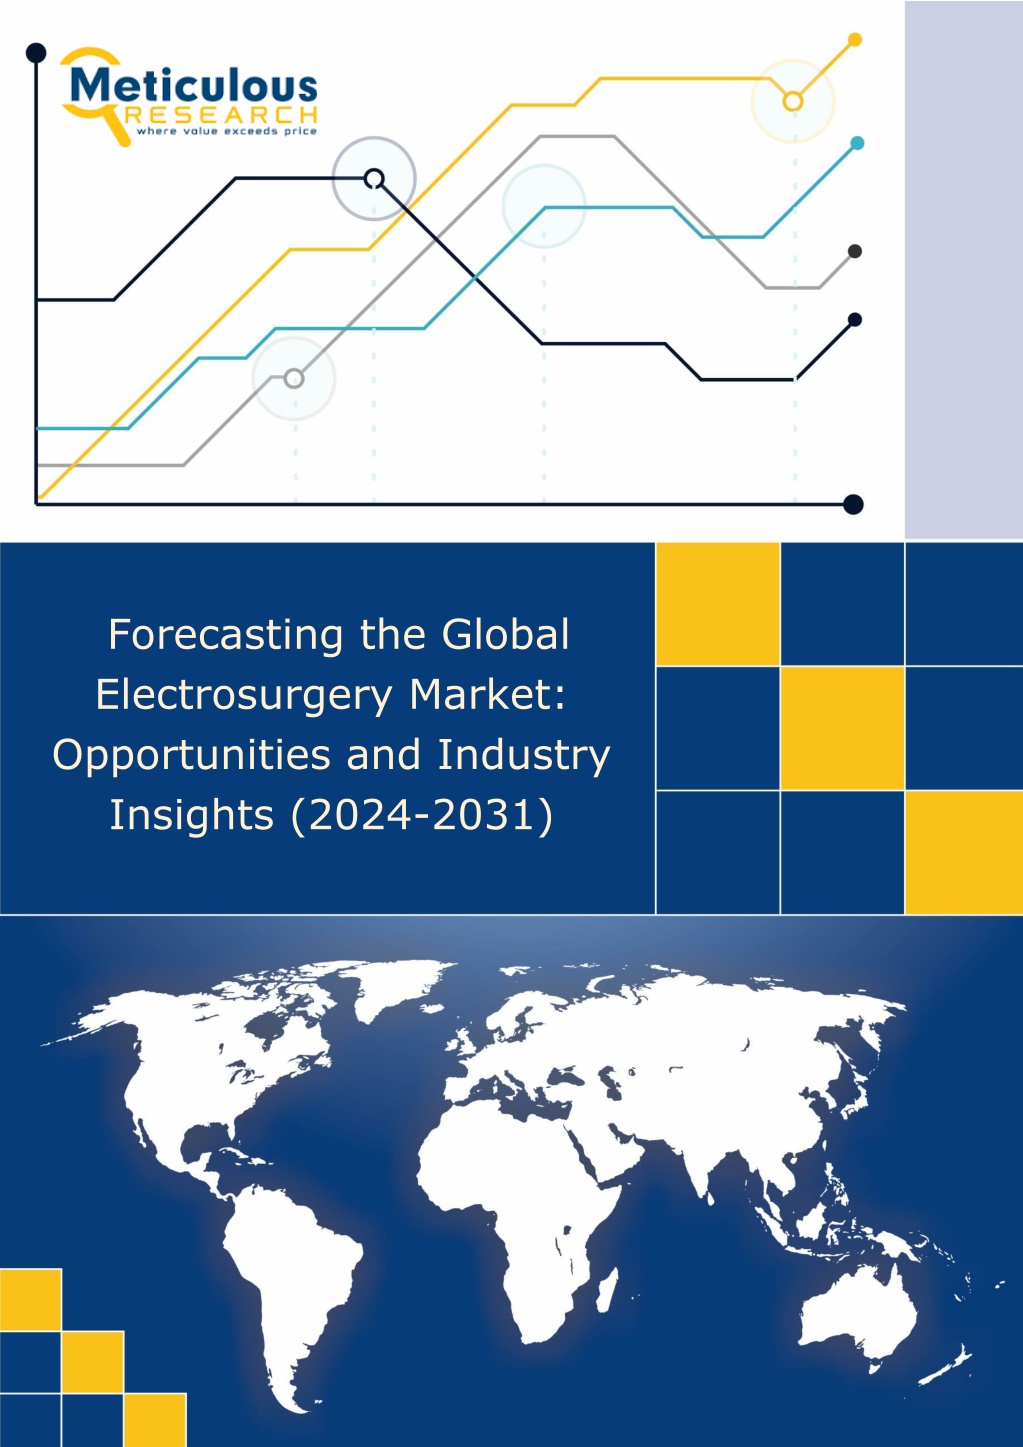 forecasting the global electrosurgery market l.w